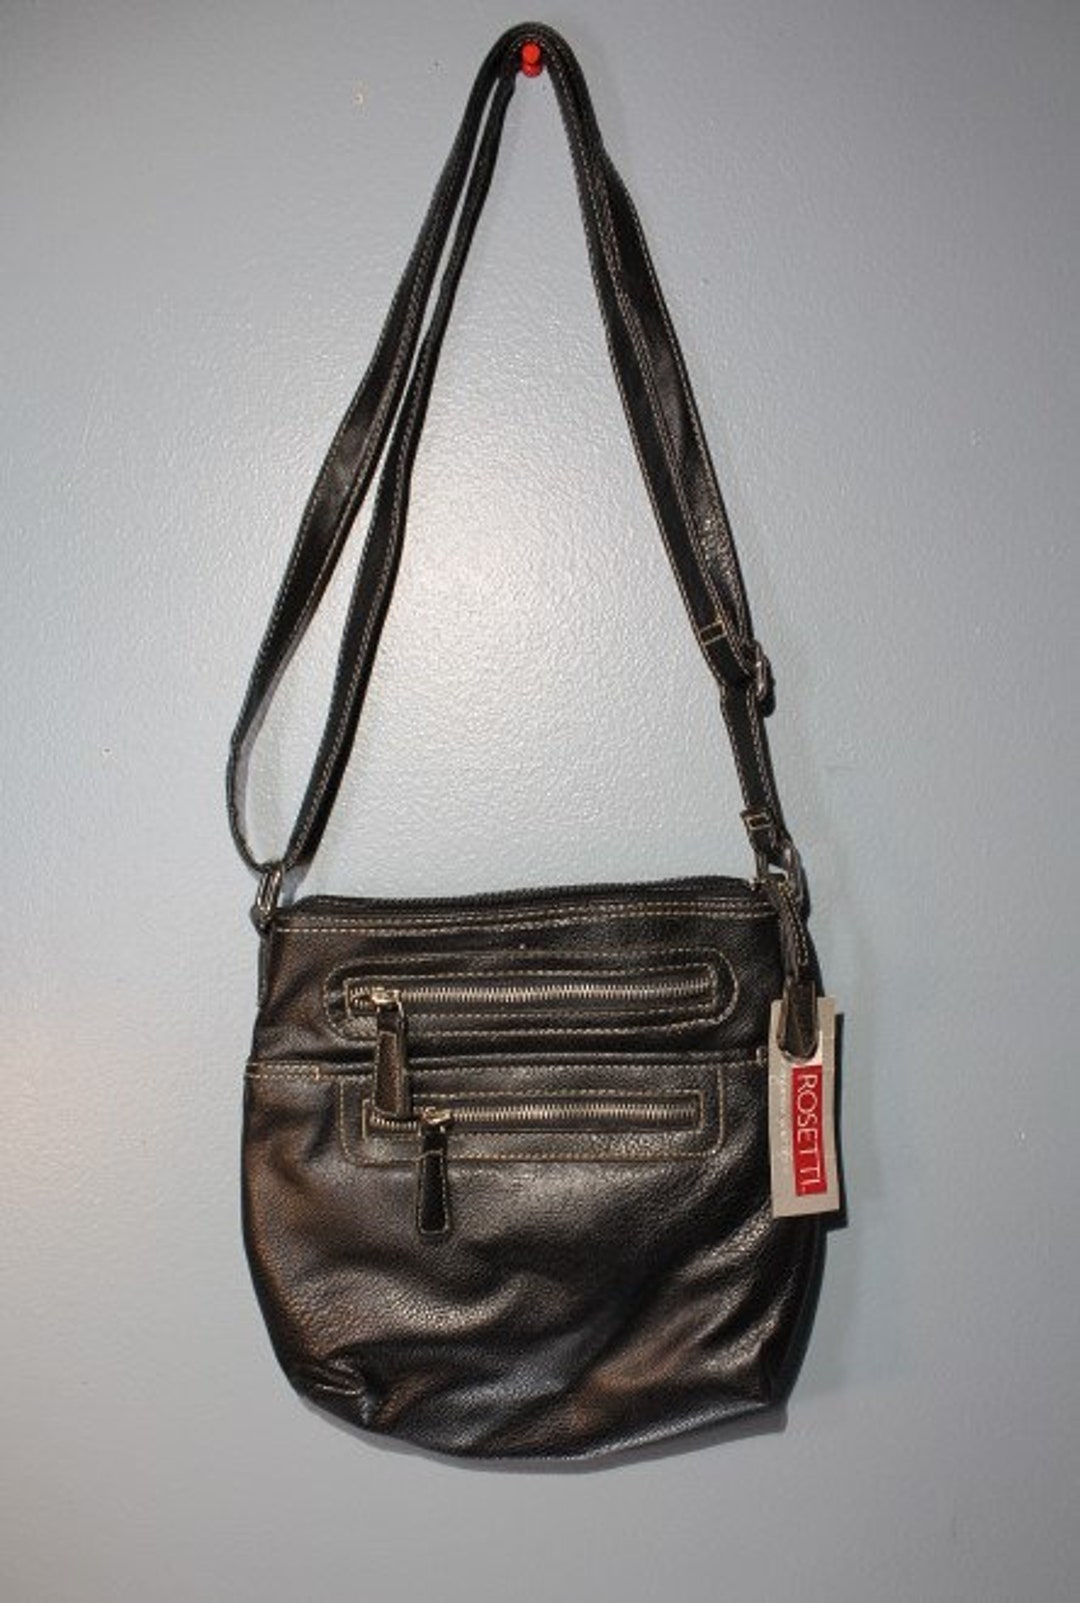 Rosetti Purse | Live and Online Auctions on HiBid.com